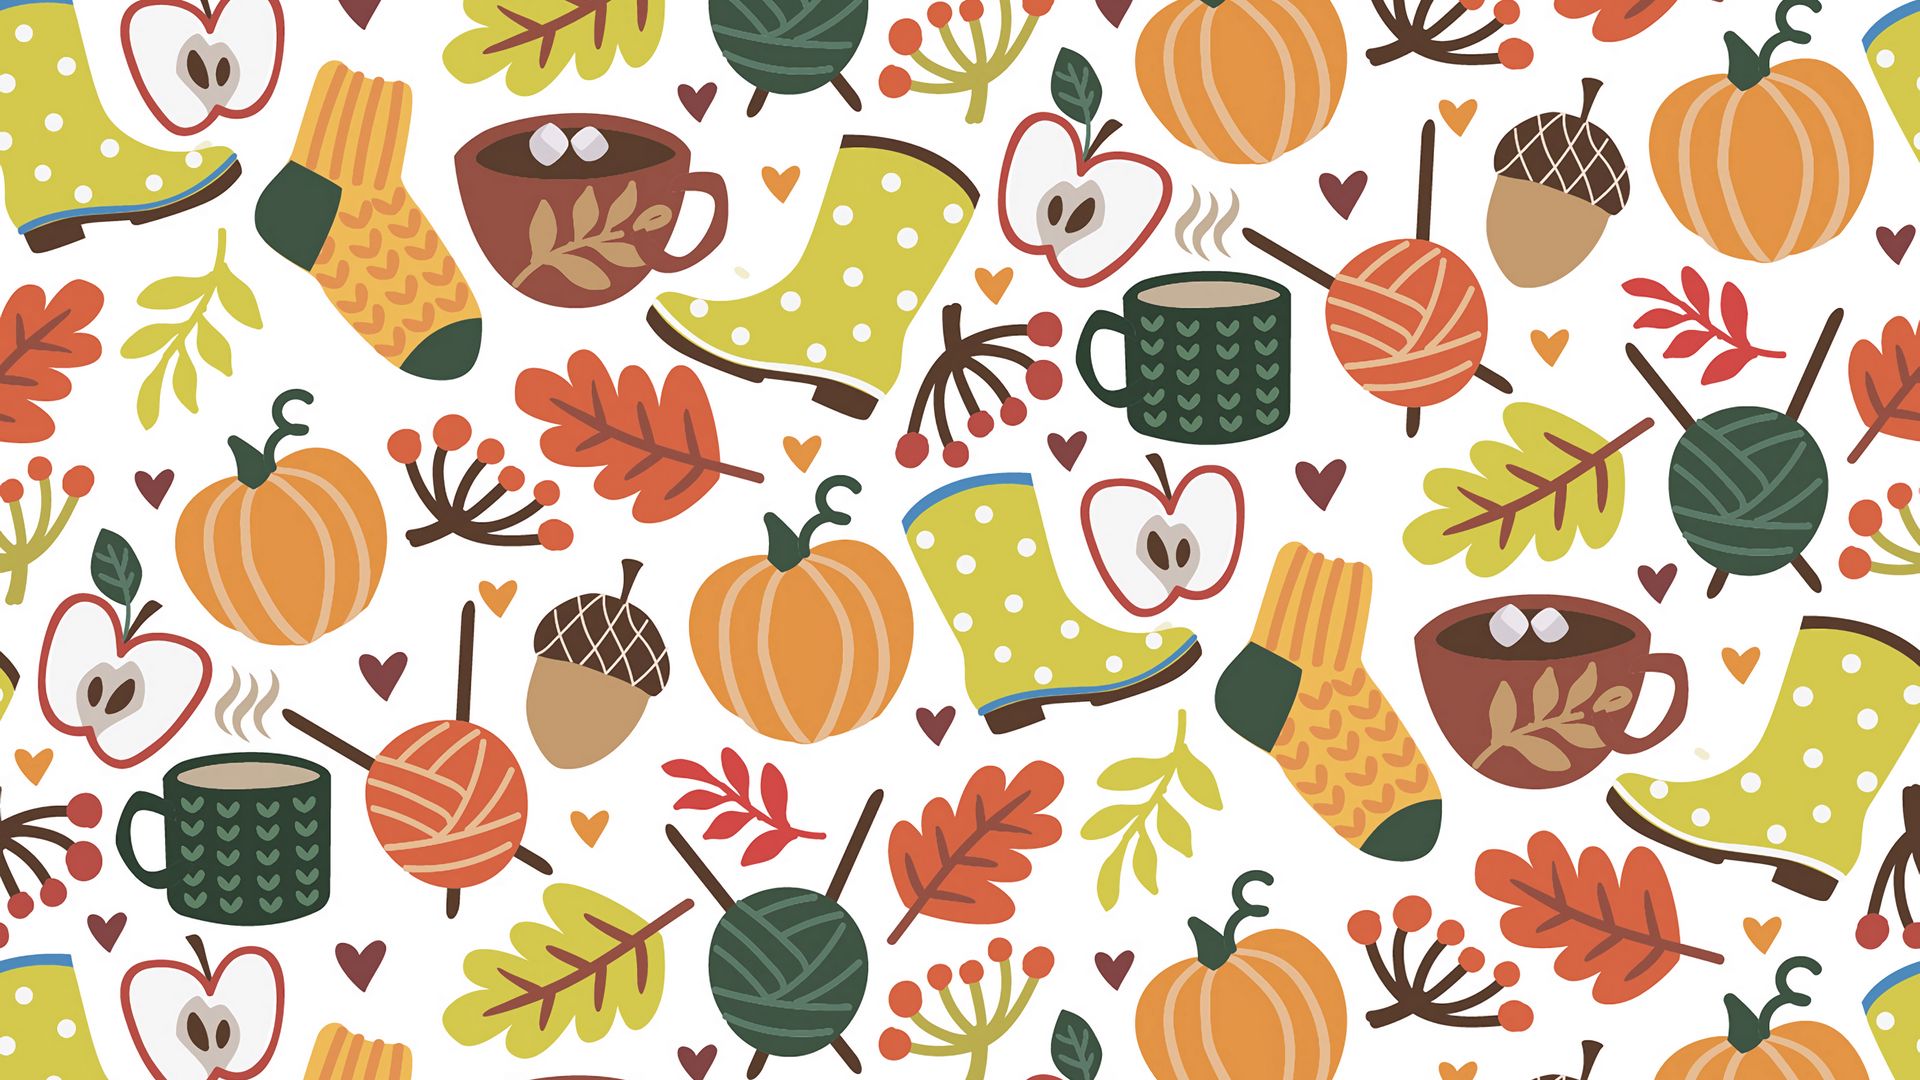 Download wallpaper 1920x1080 autumn, pattern, comfort, socks, cocoa, leaves full hd, hdtv, fhd, 1080p HD background